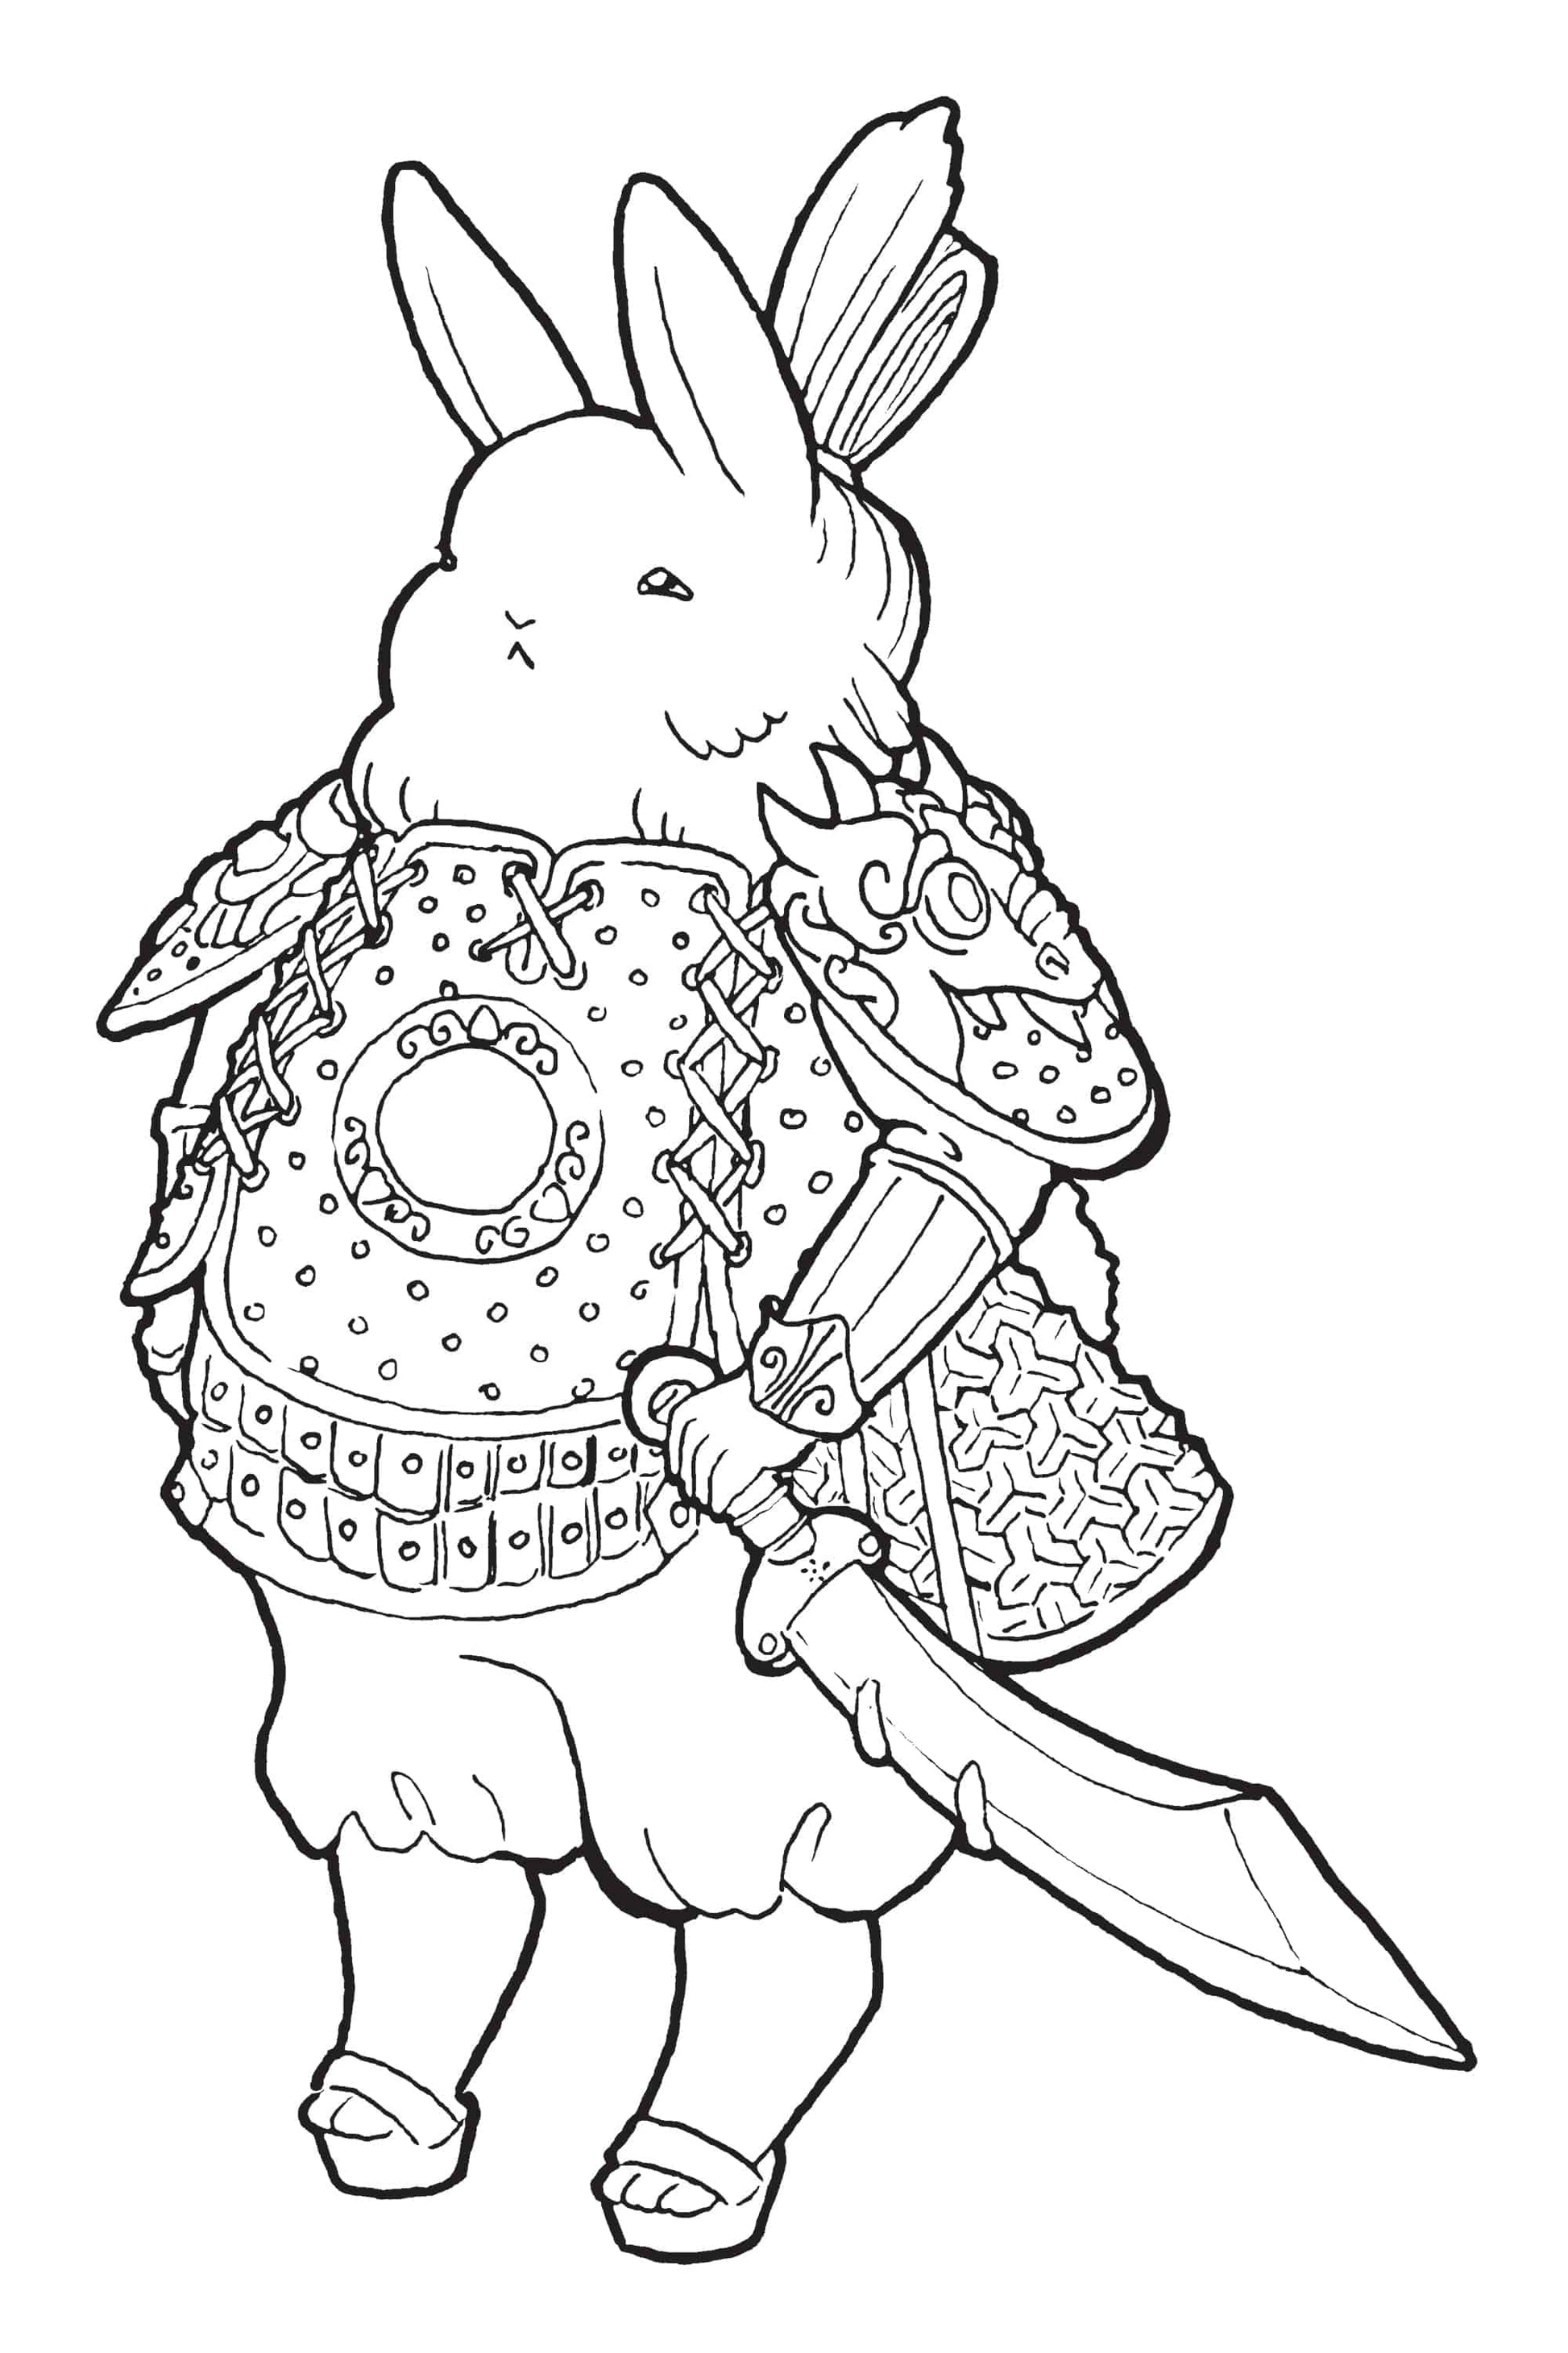 Bunny Warrior, Topknot Rabbit | Dungeons and Dragons Tabletop Roleplaying Game Miniature | Pepunki Miniatures - Tattles Told 3D